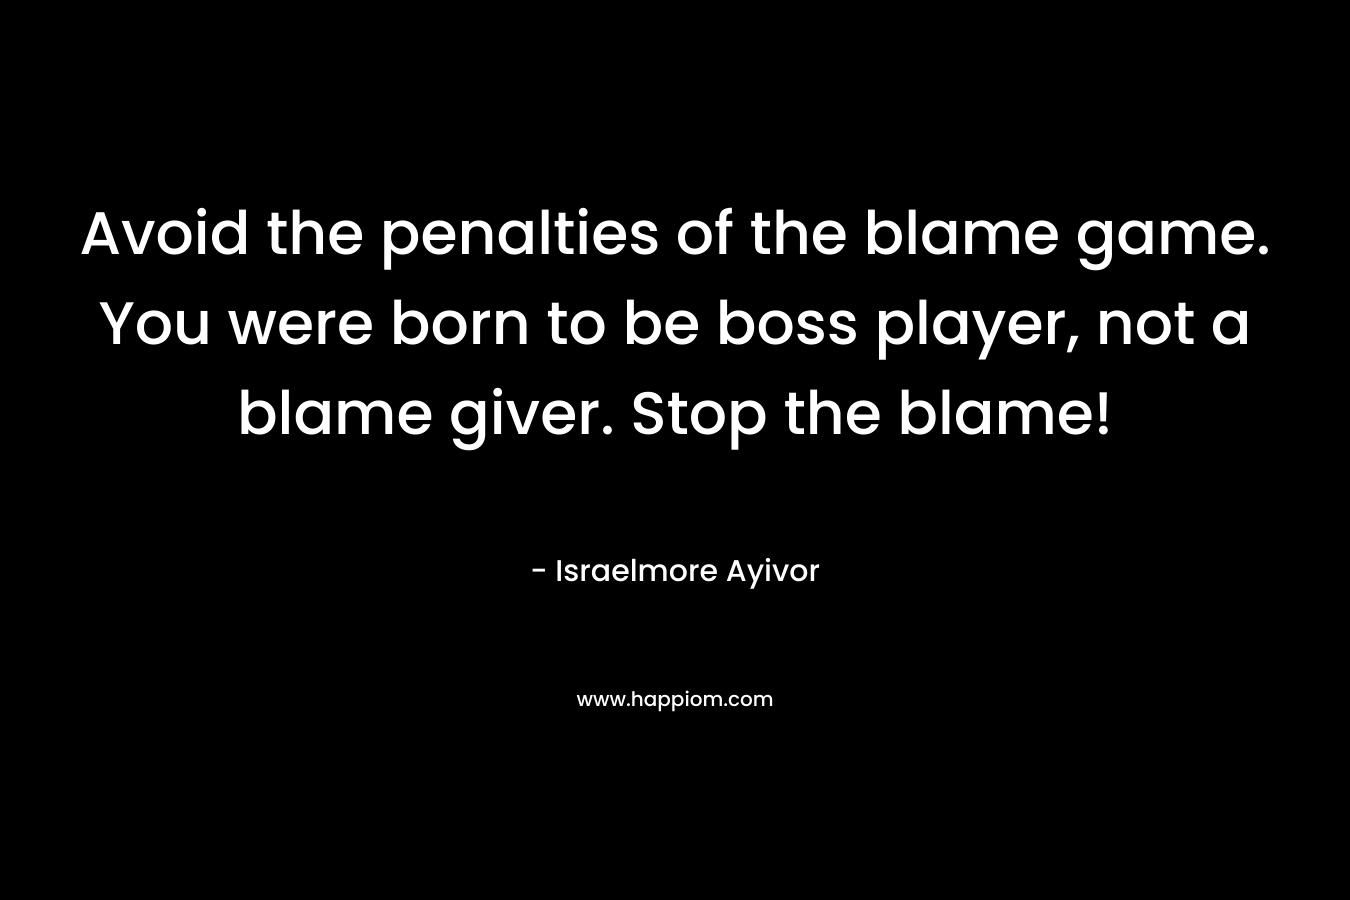 Avoid the penalties of the blame game. You were born to be boss player, not a blame giver. Stop the blame!